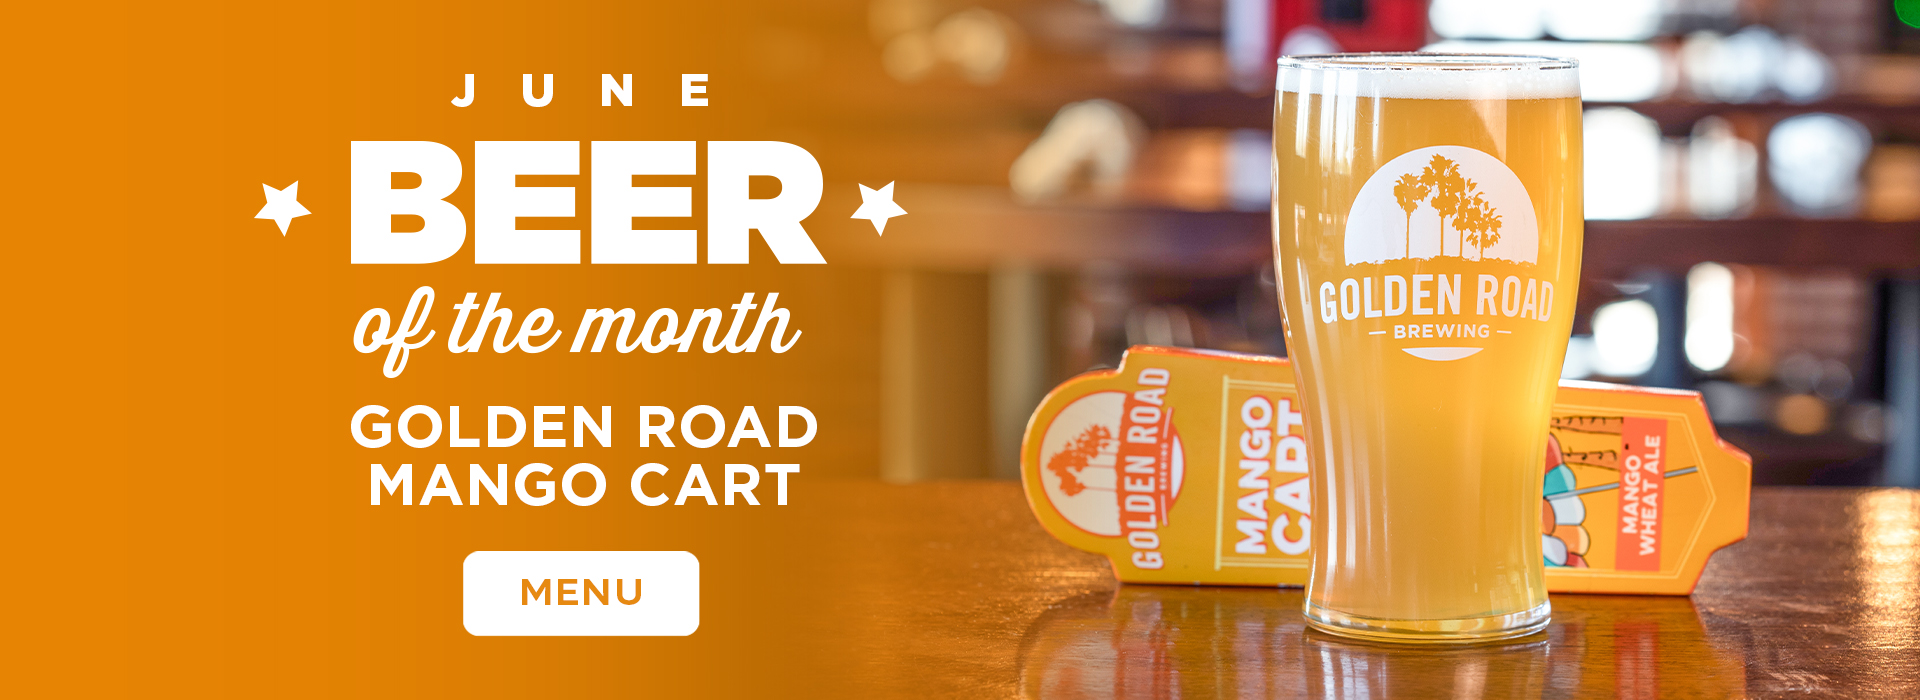 click or tap here to view our beer of the month!